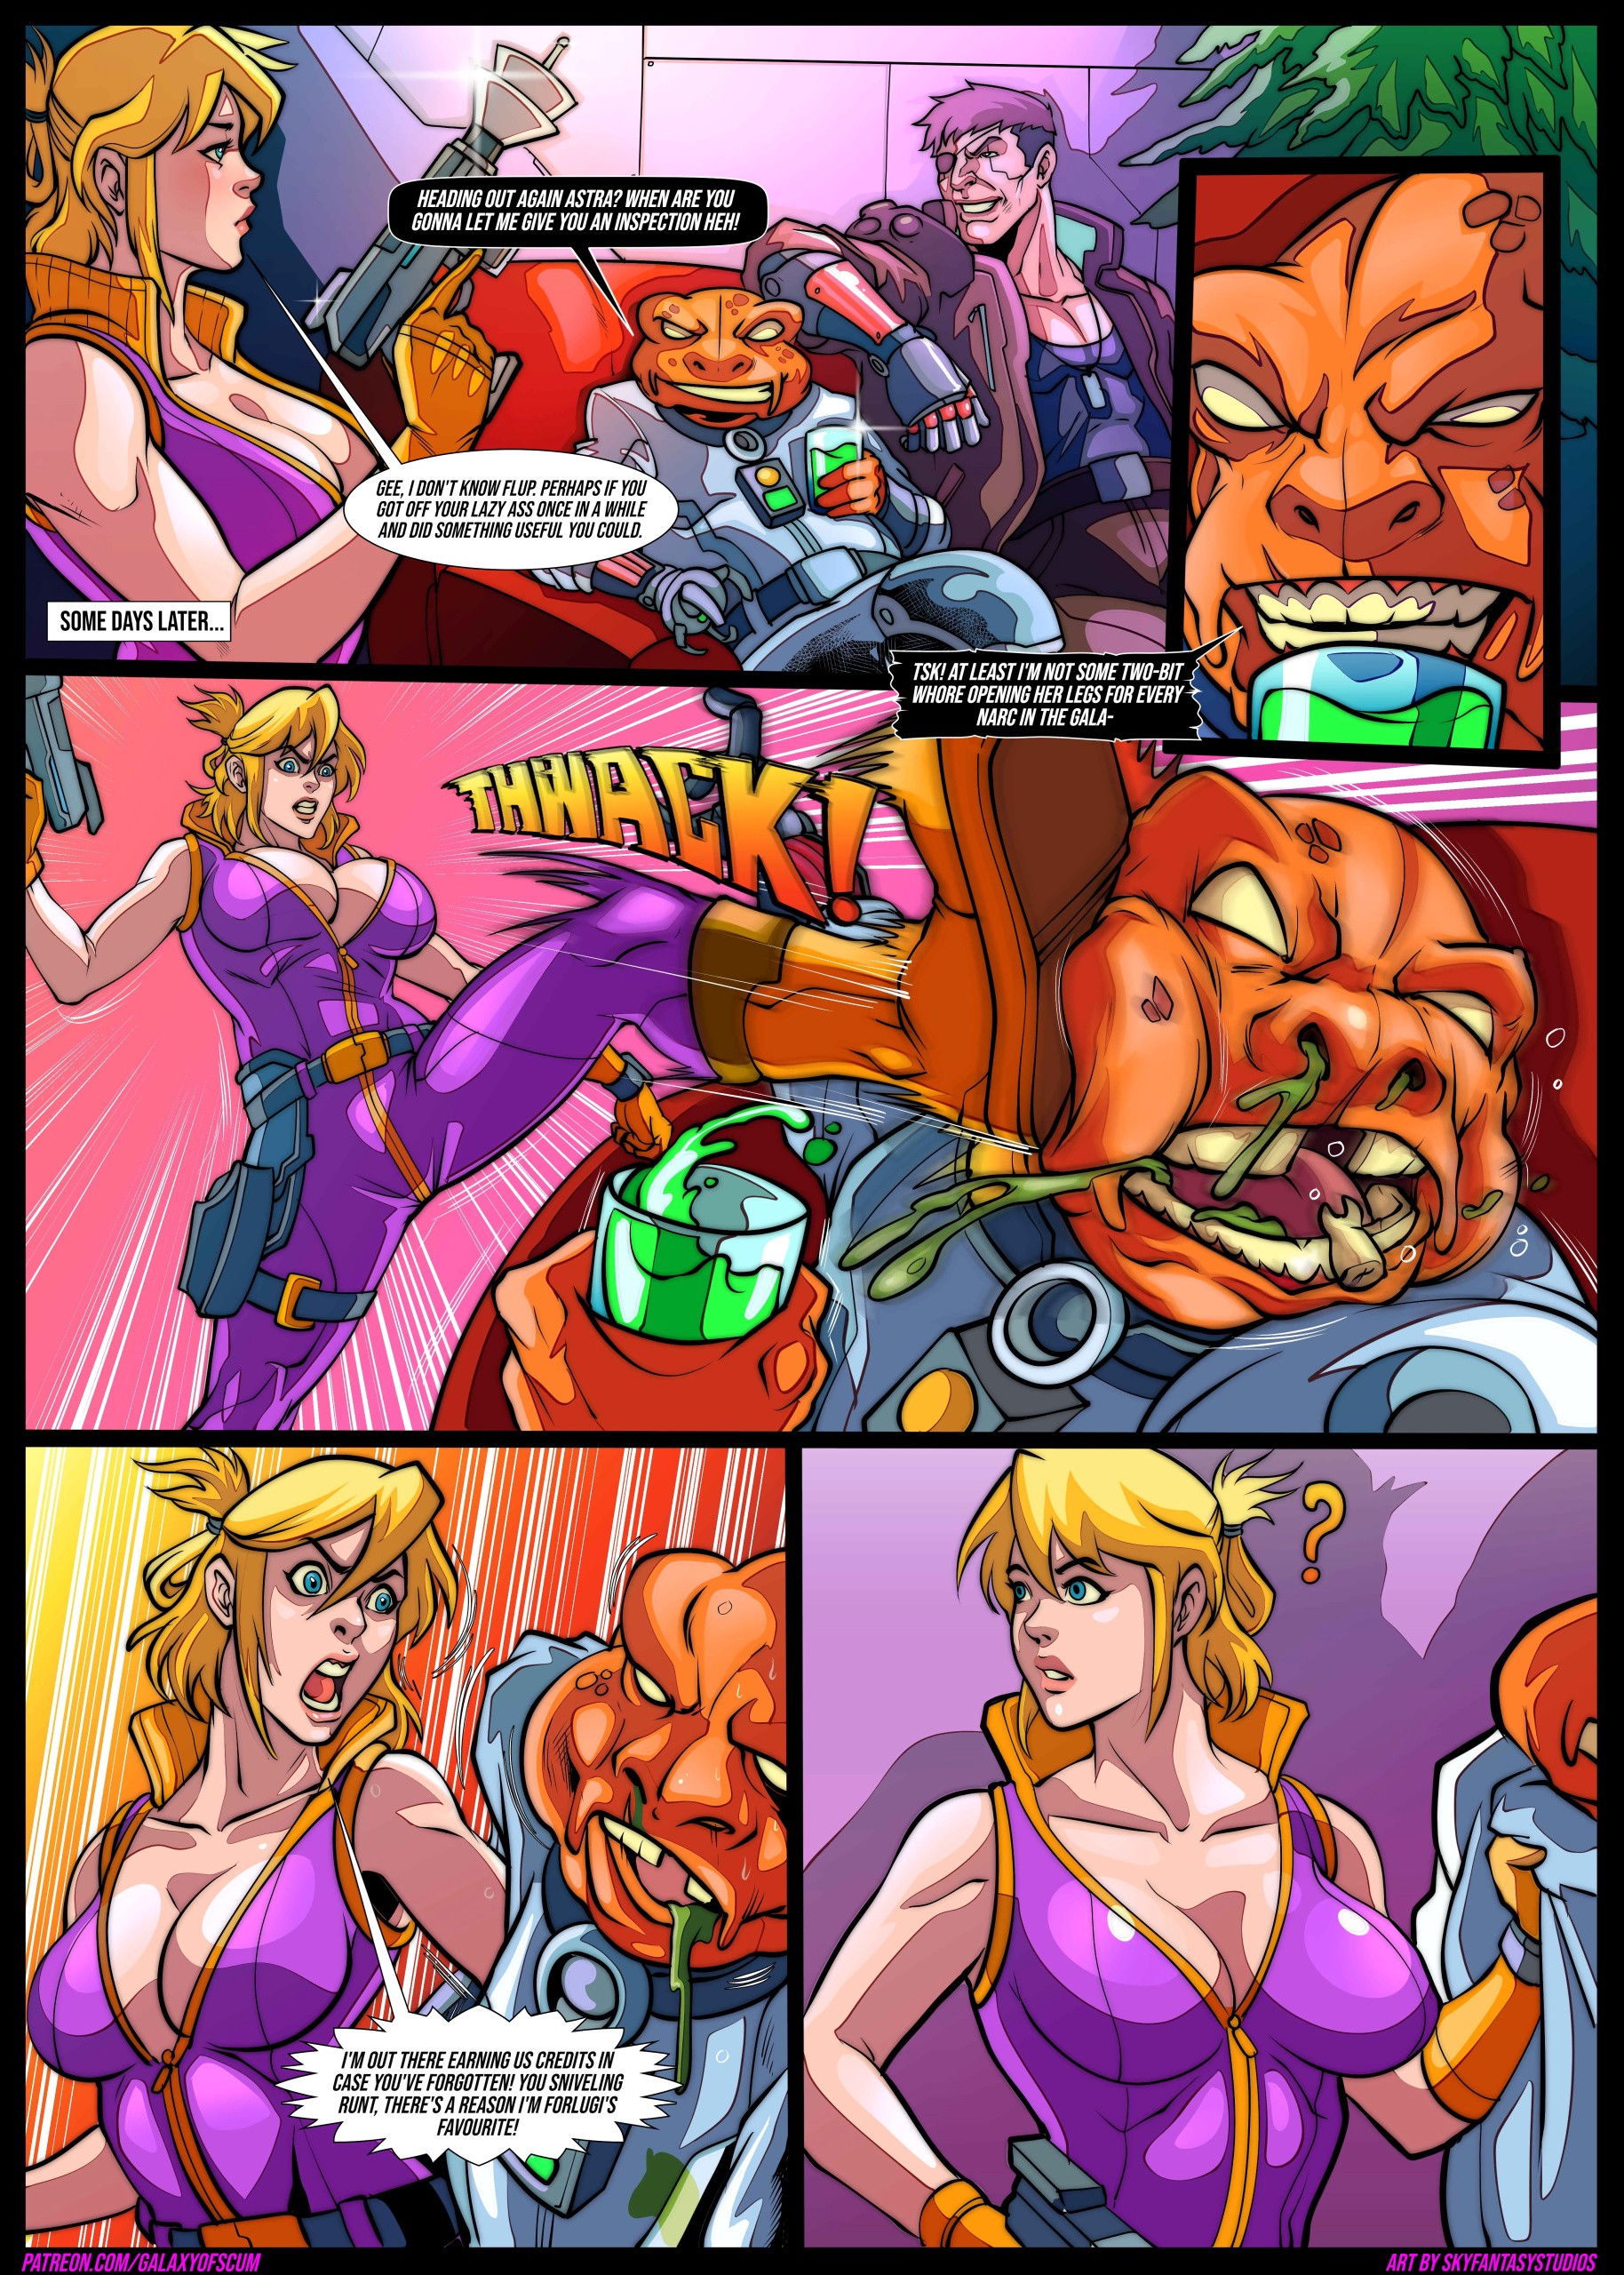 Galaxy of Scum Issue 2: Smuggler's and Bugs porn comic picture 10